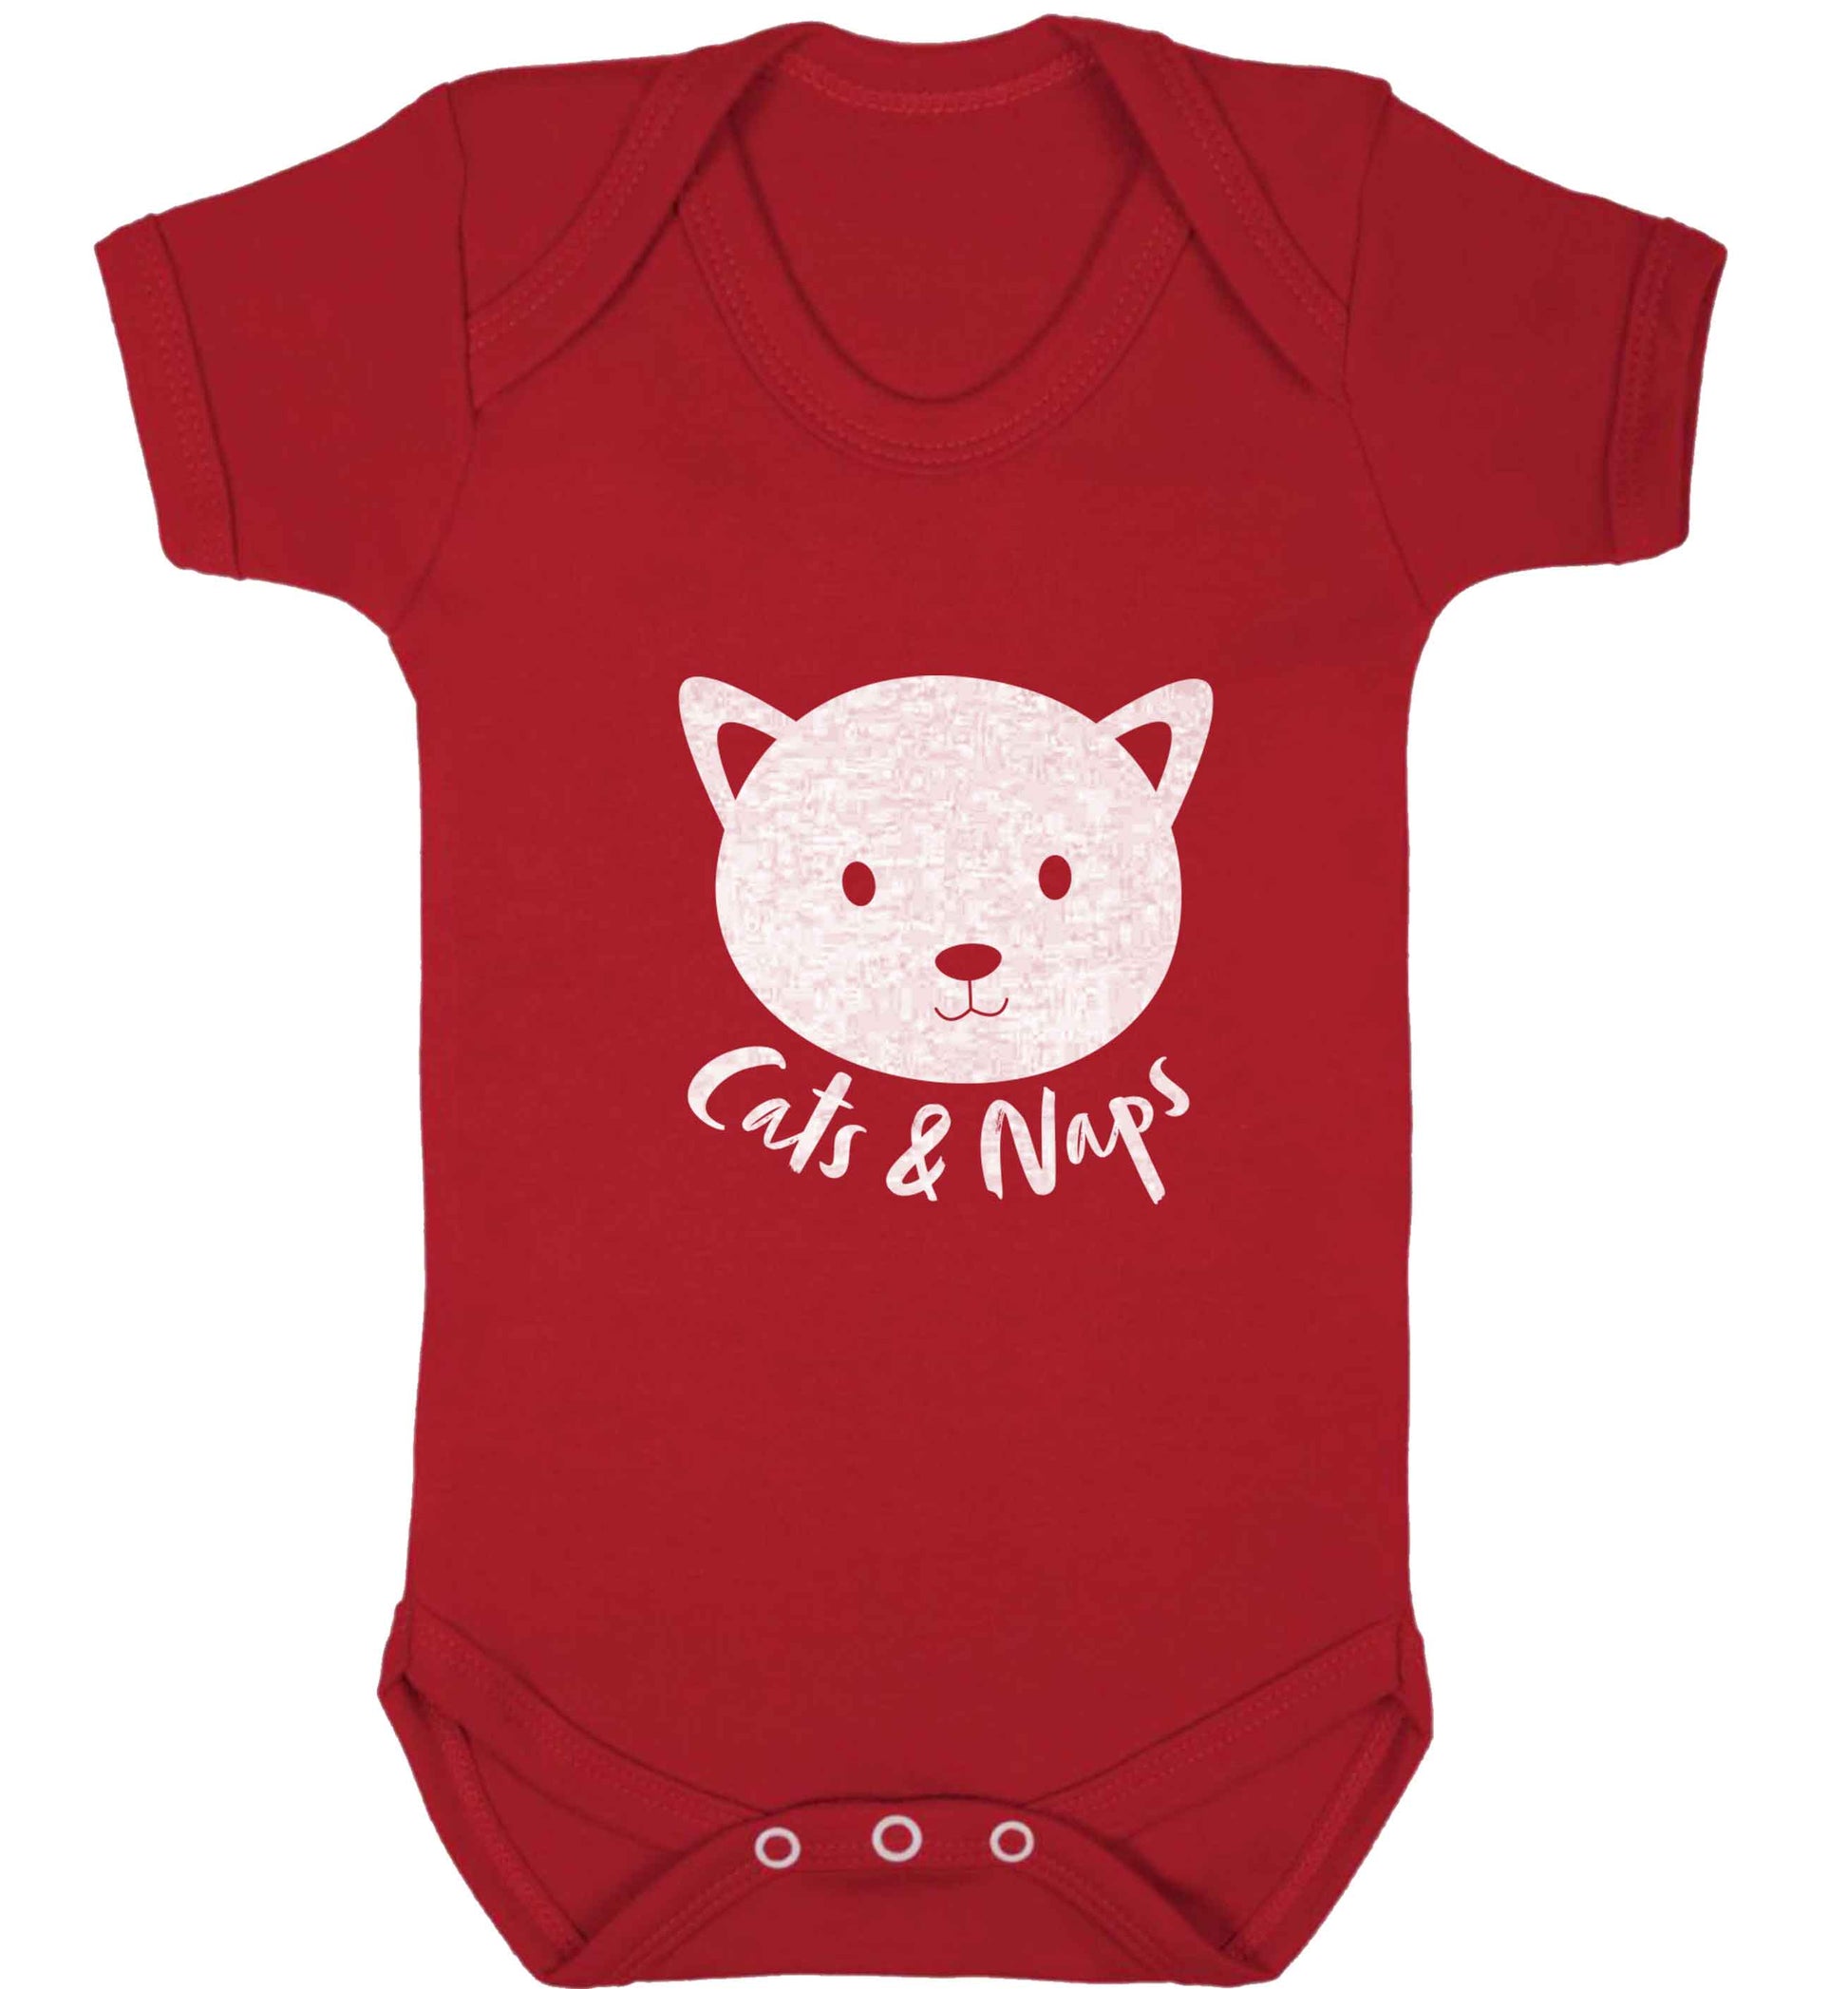 Cats and naps Kit baby vest red 18-24 months